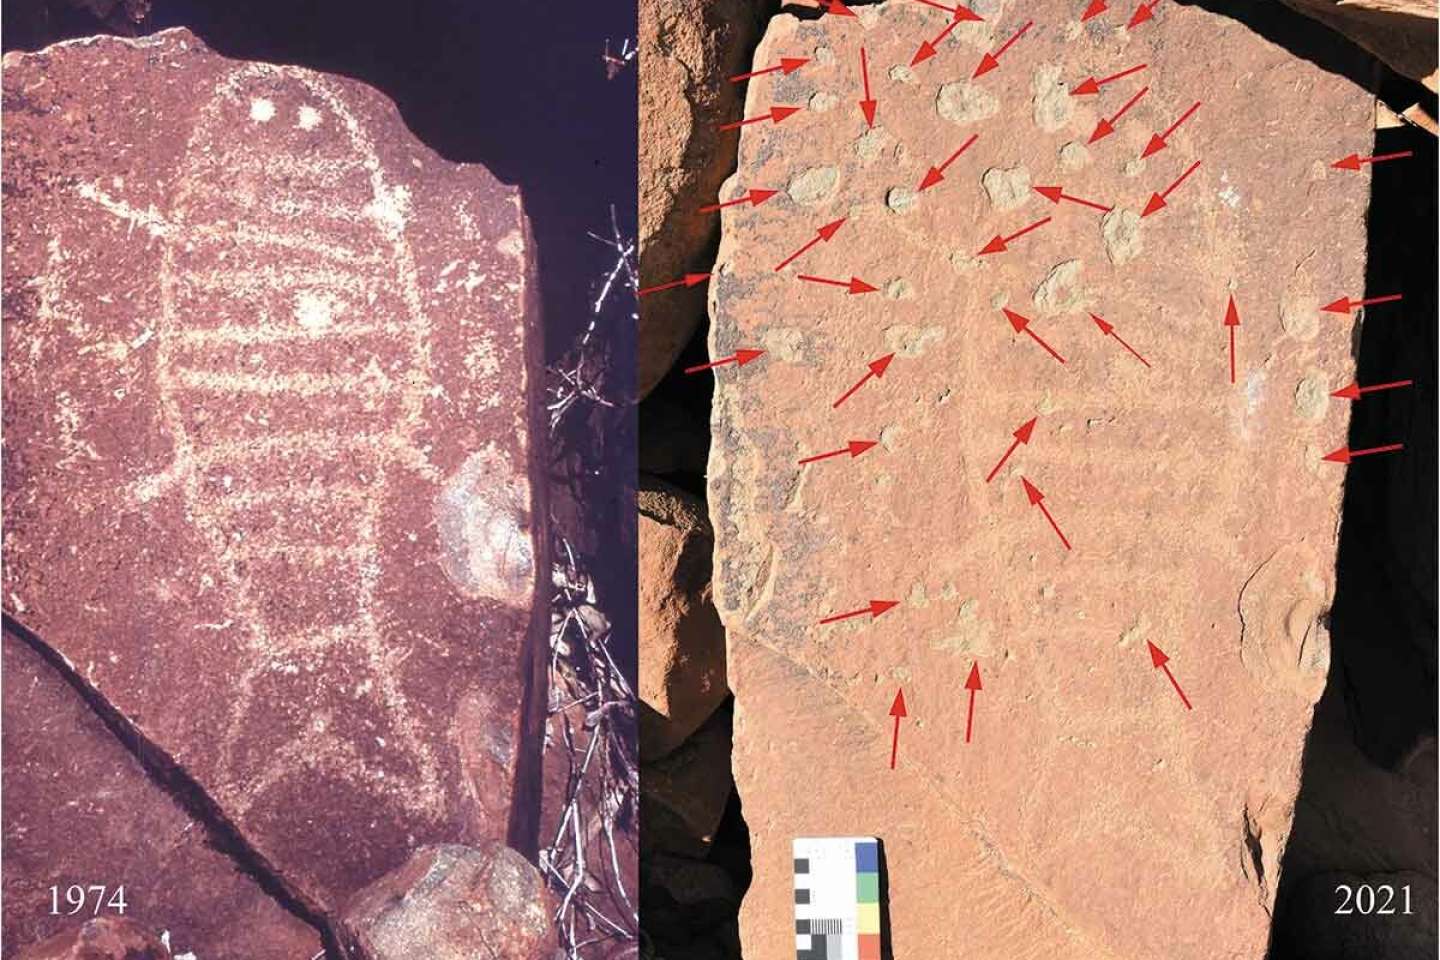 One of the largest rock art ensembles in the world threatened by petrochemical industries